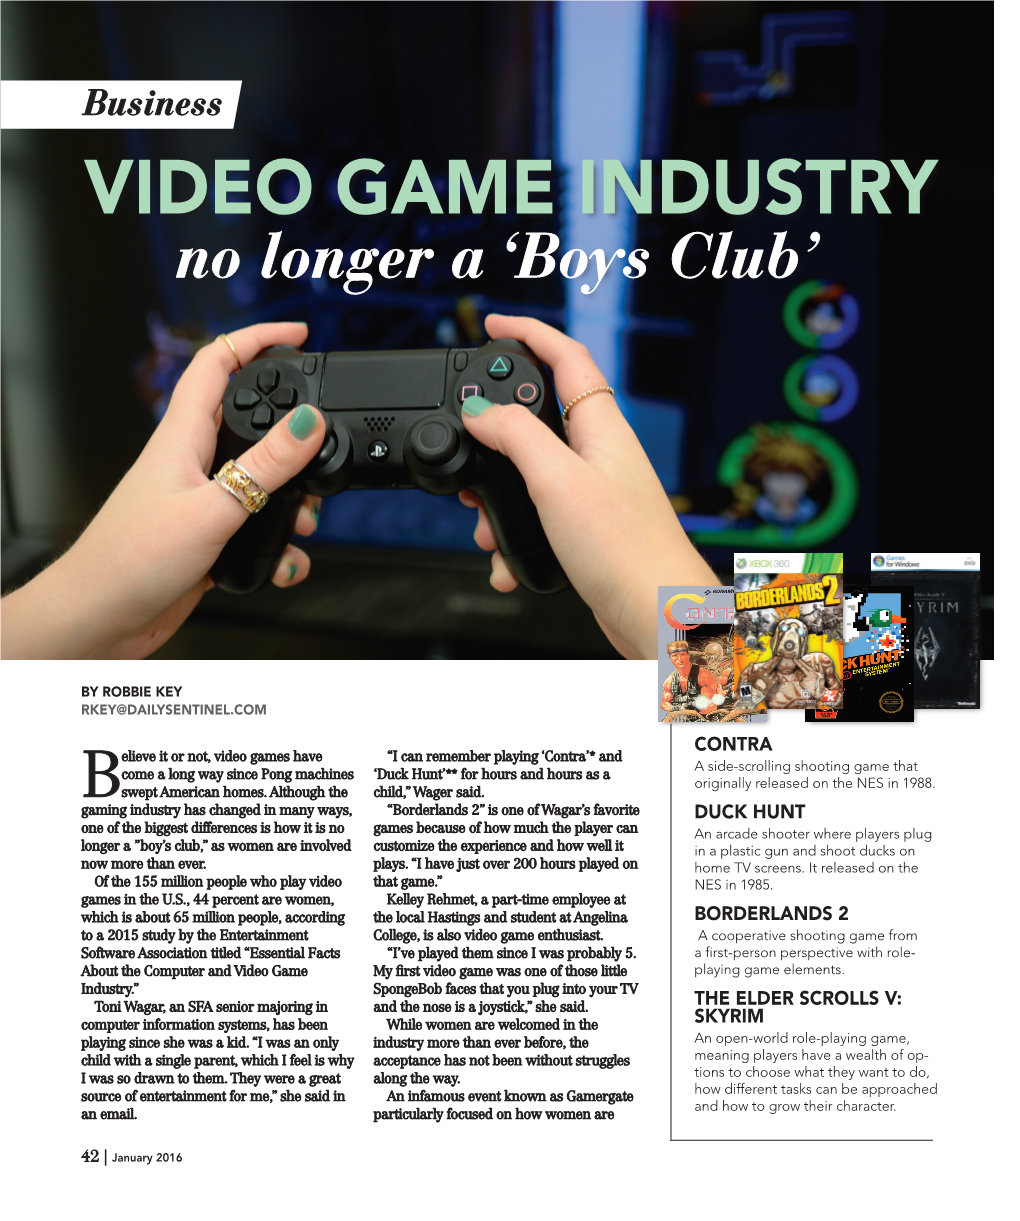 Video Game Industry No Longer a ‘Boys Club’